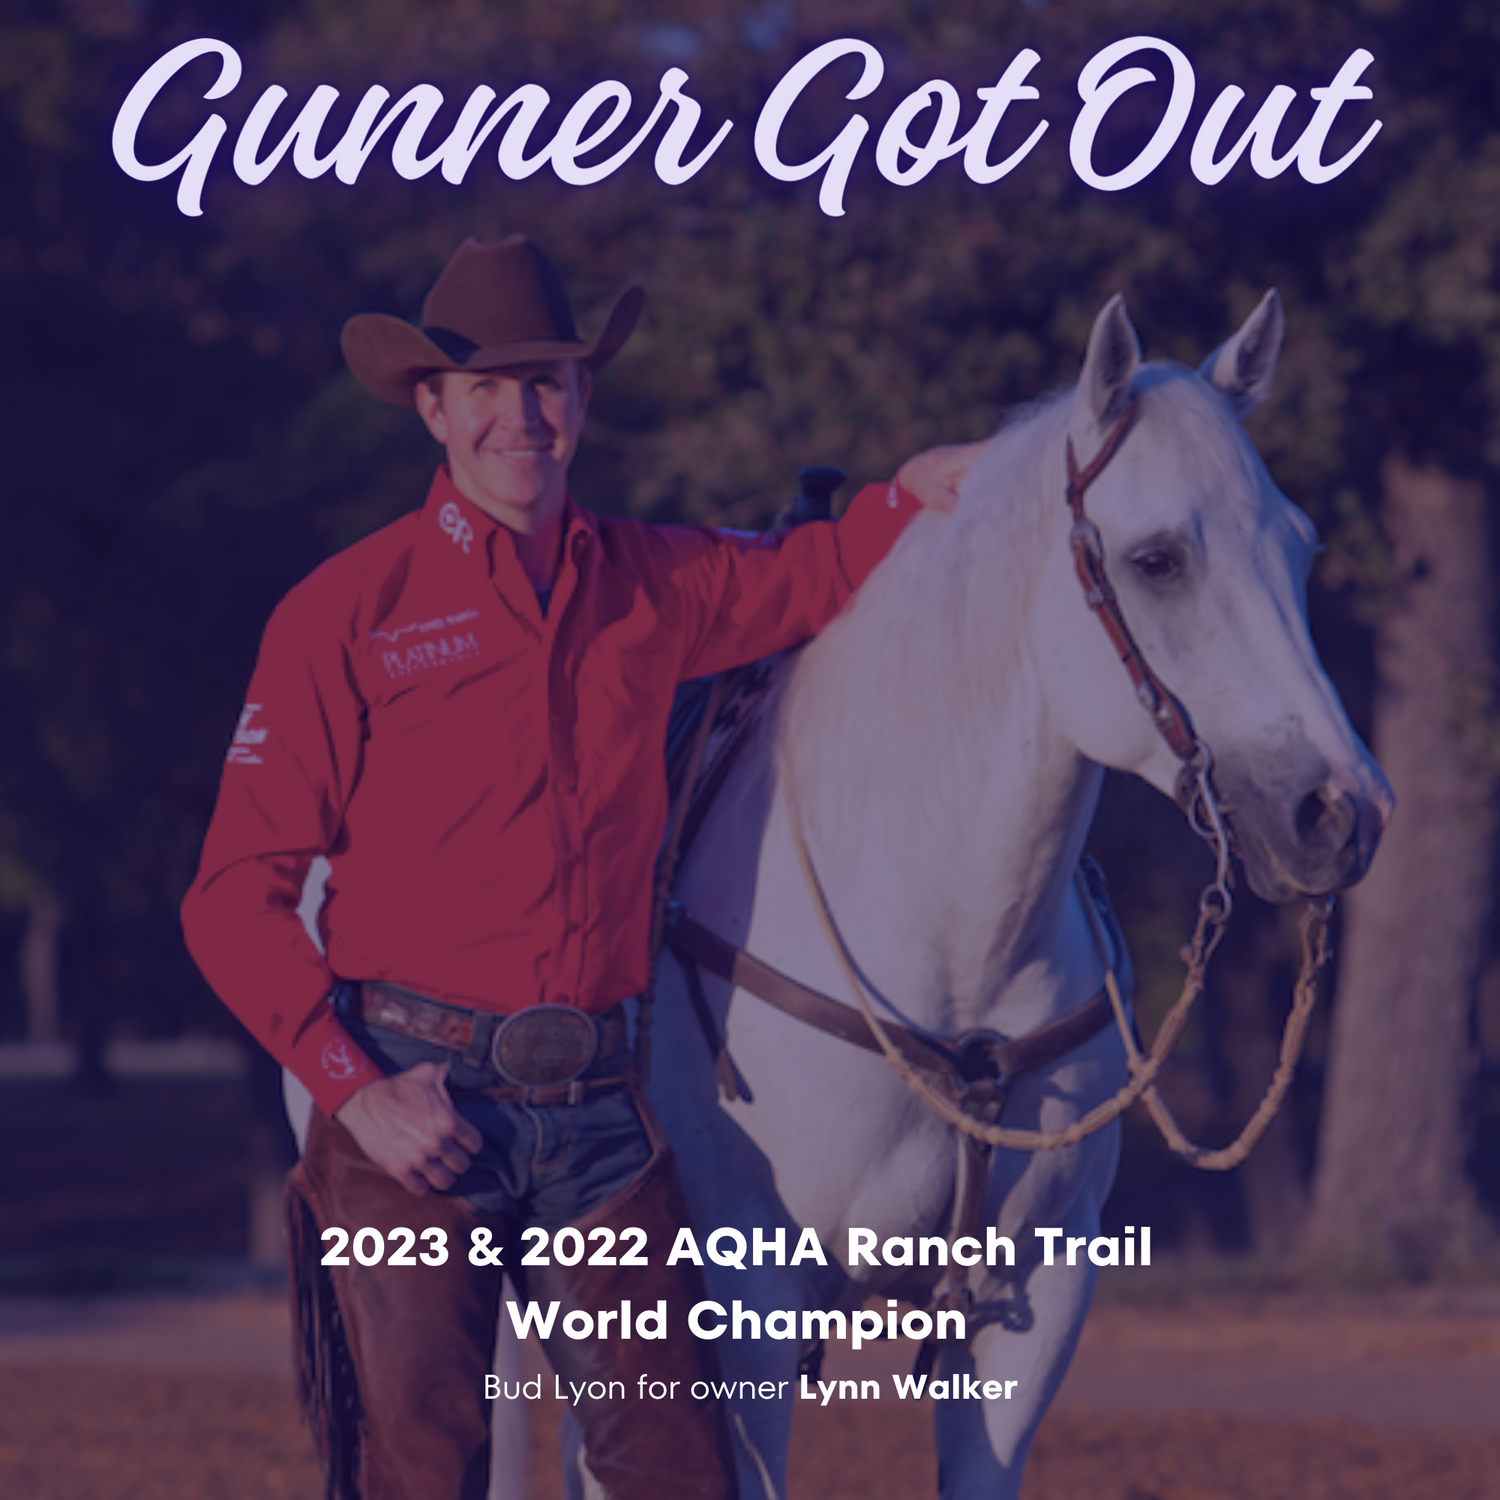 Bud Lyon rode Gunner Got Out to back-to-back AQHA Ranch Trail World Champion titles.